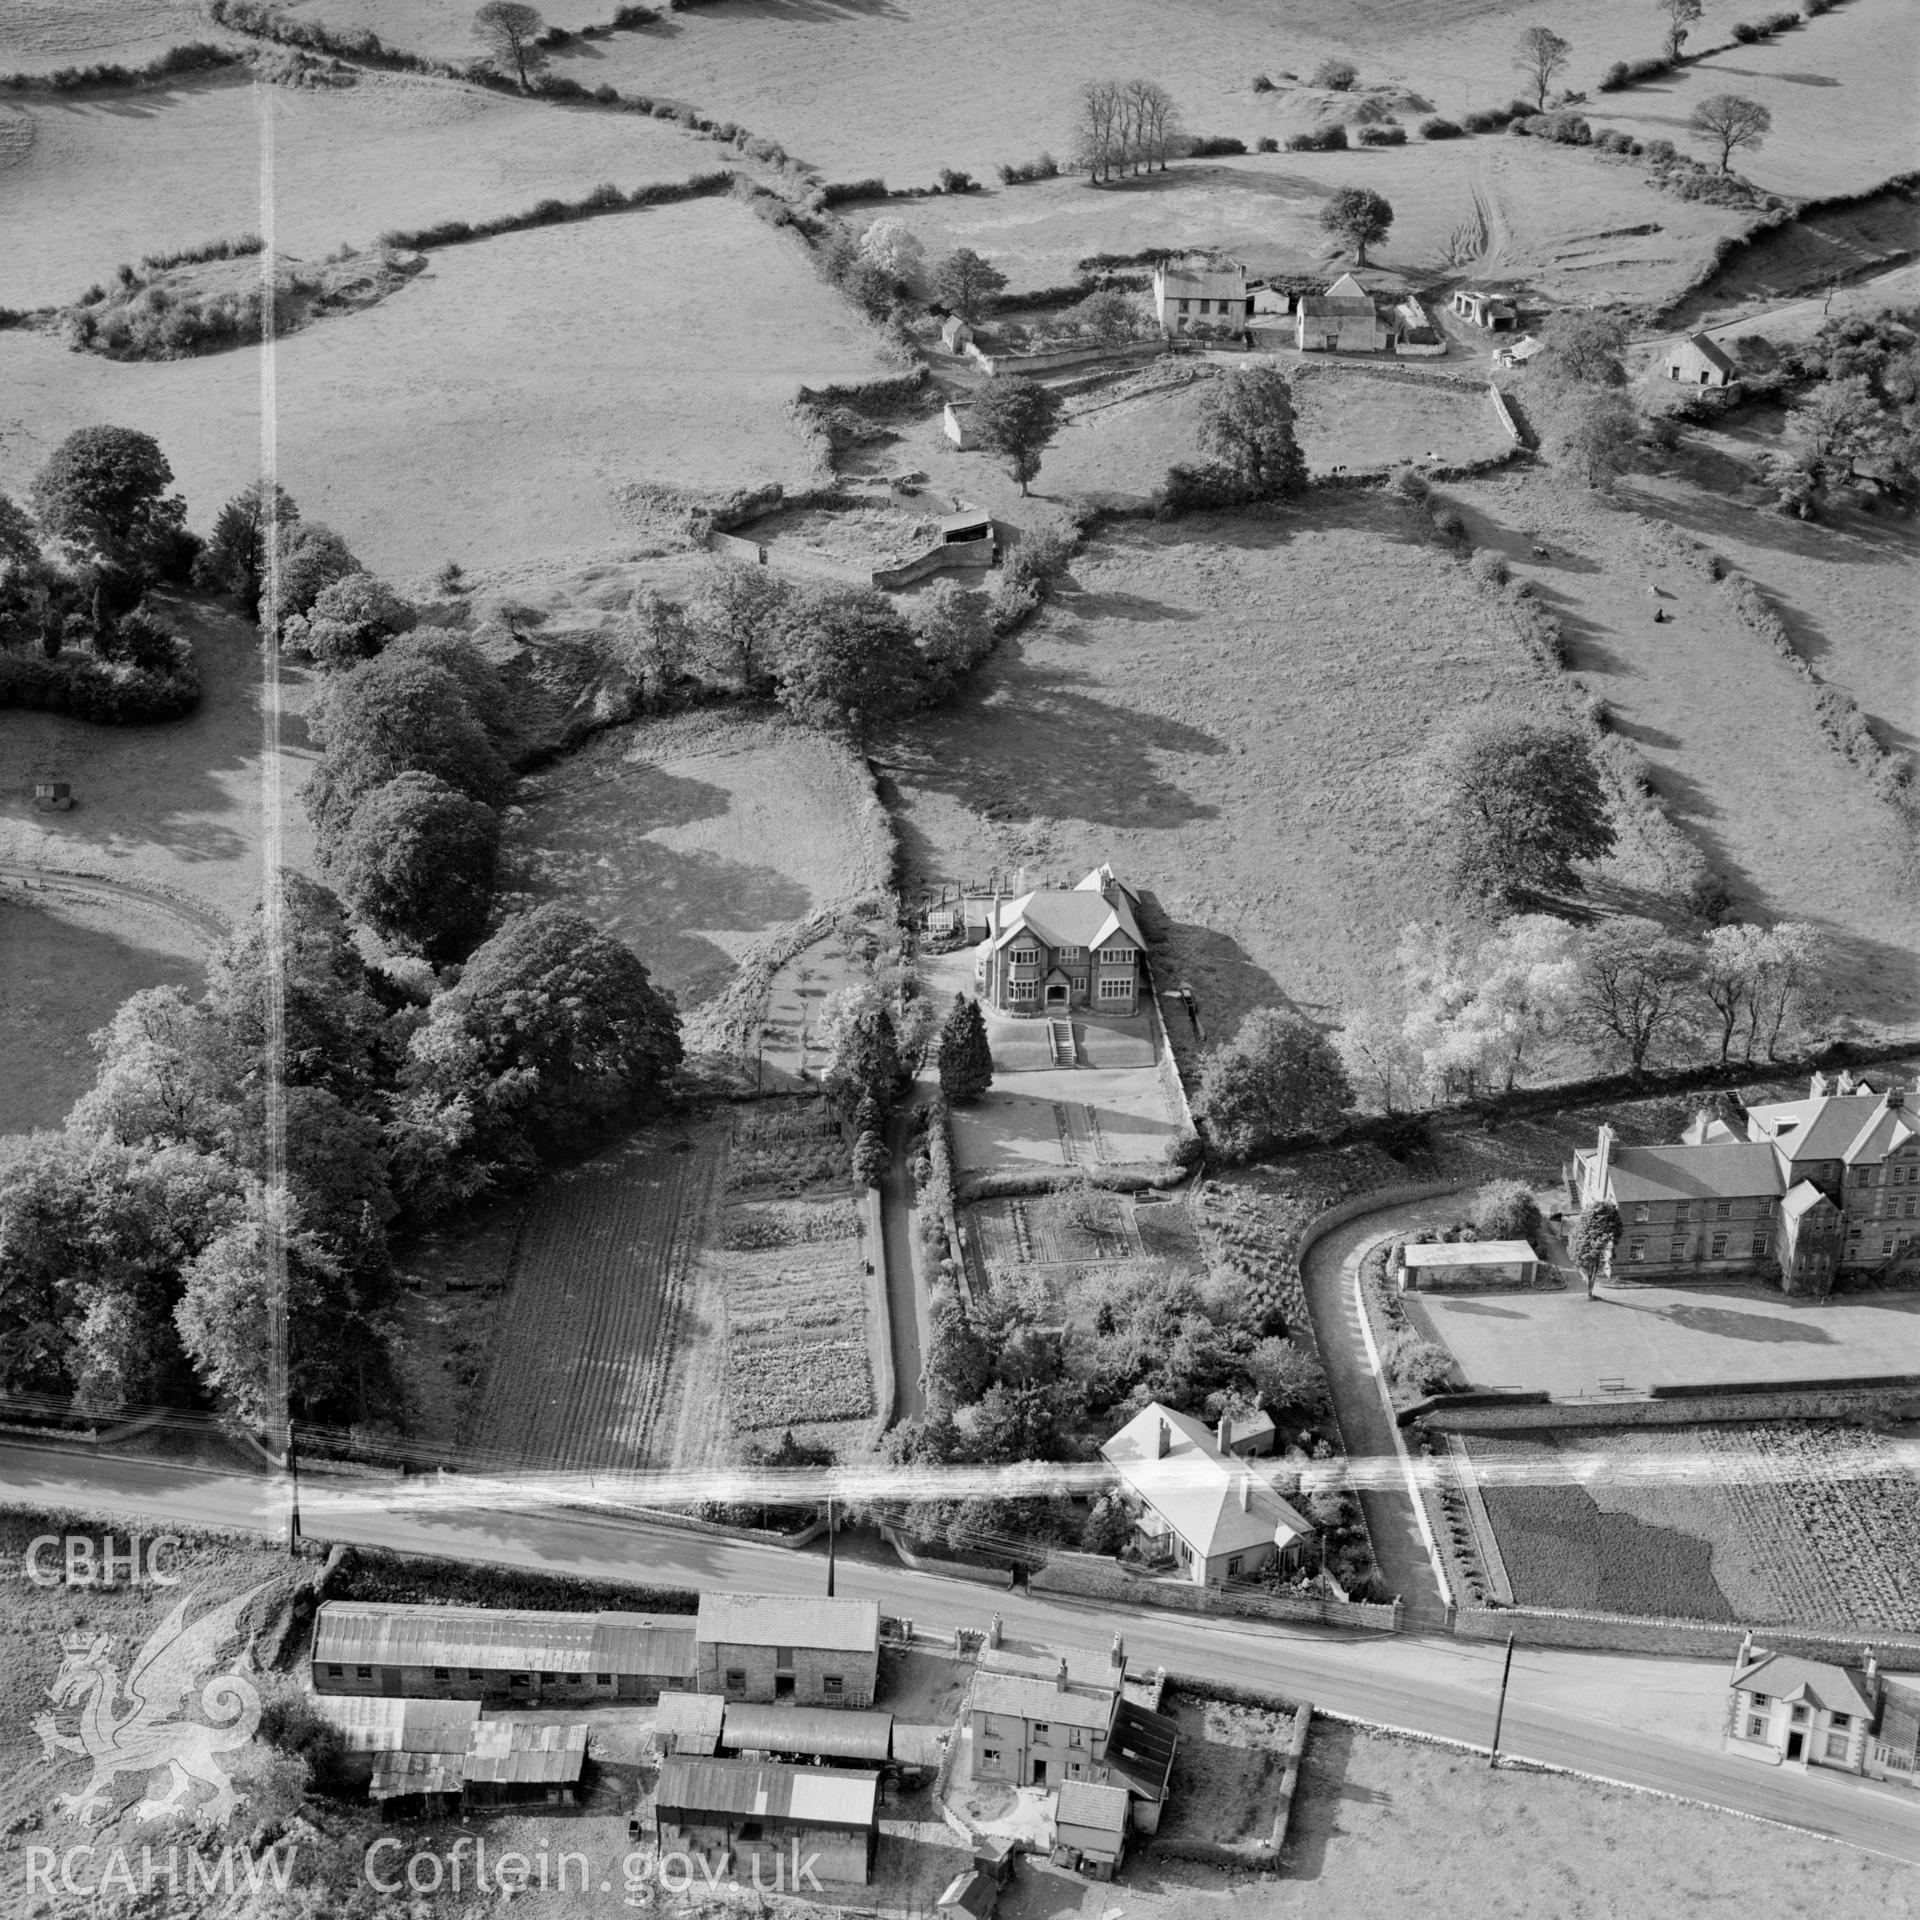 View of area south of Holywell showing Arthfa, Stamford Dairy and Lluesty Hospital. Labelled "Holywell Textile Mills Ltd., Highfield & Pistyll".